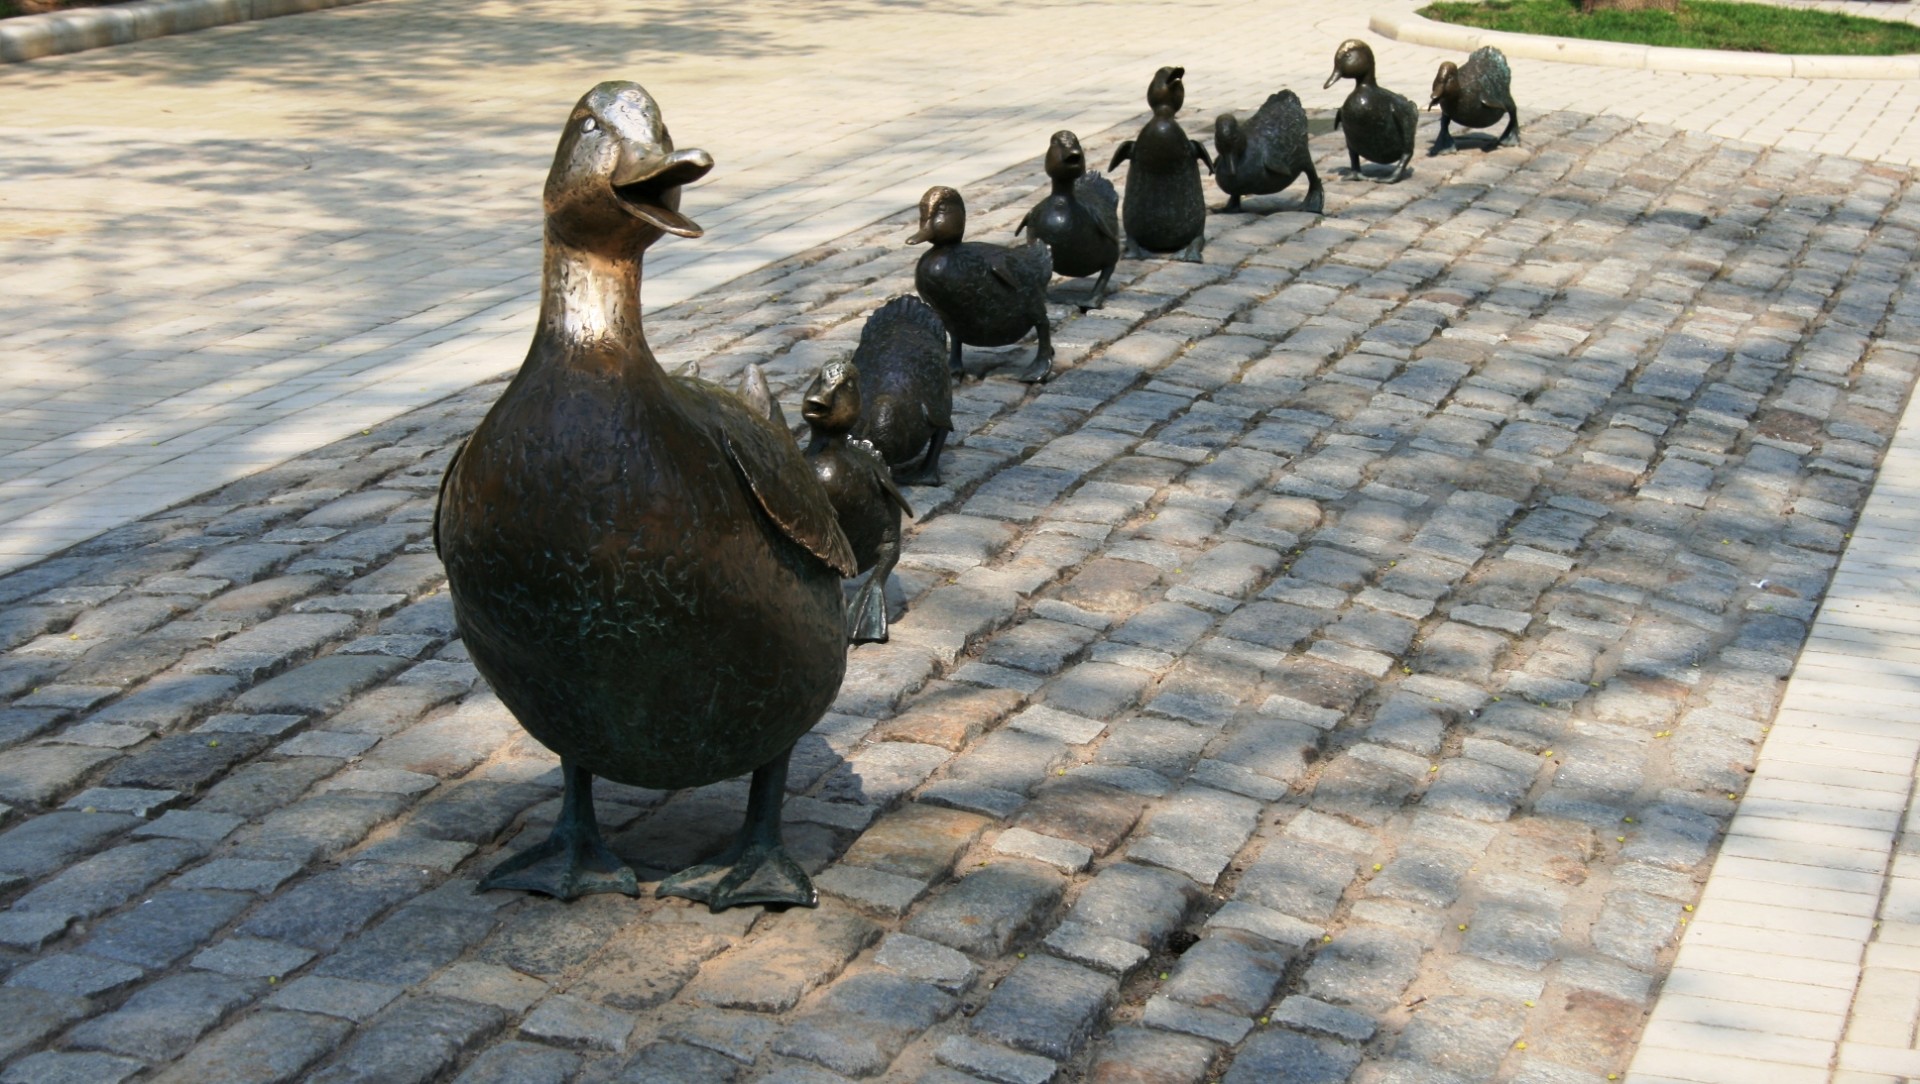 Mother duck with ducklings, novodevichy, moscow